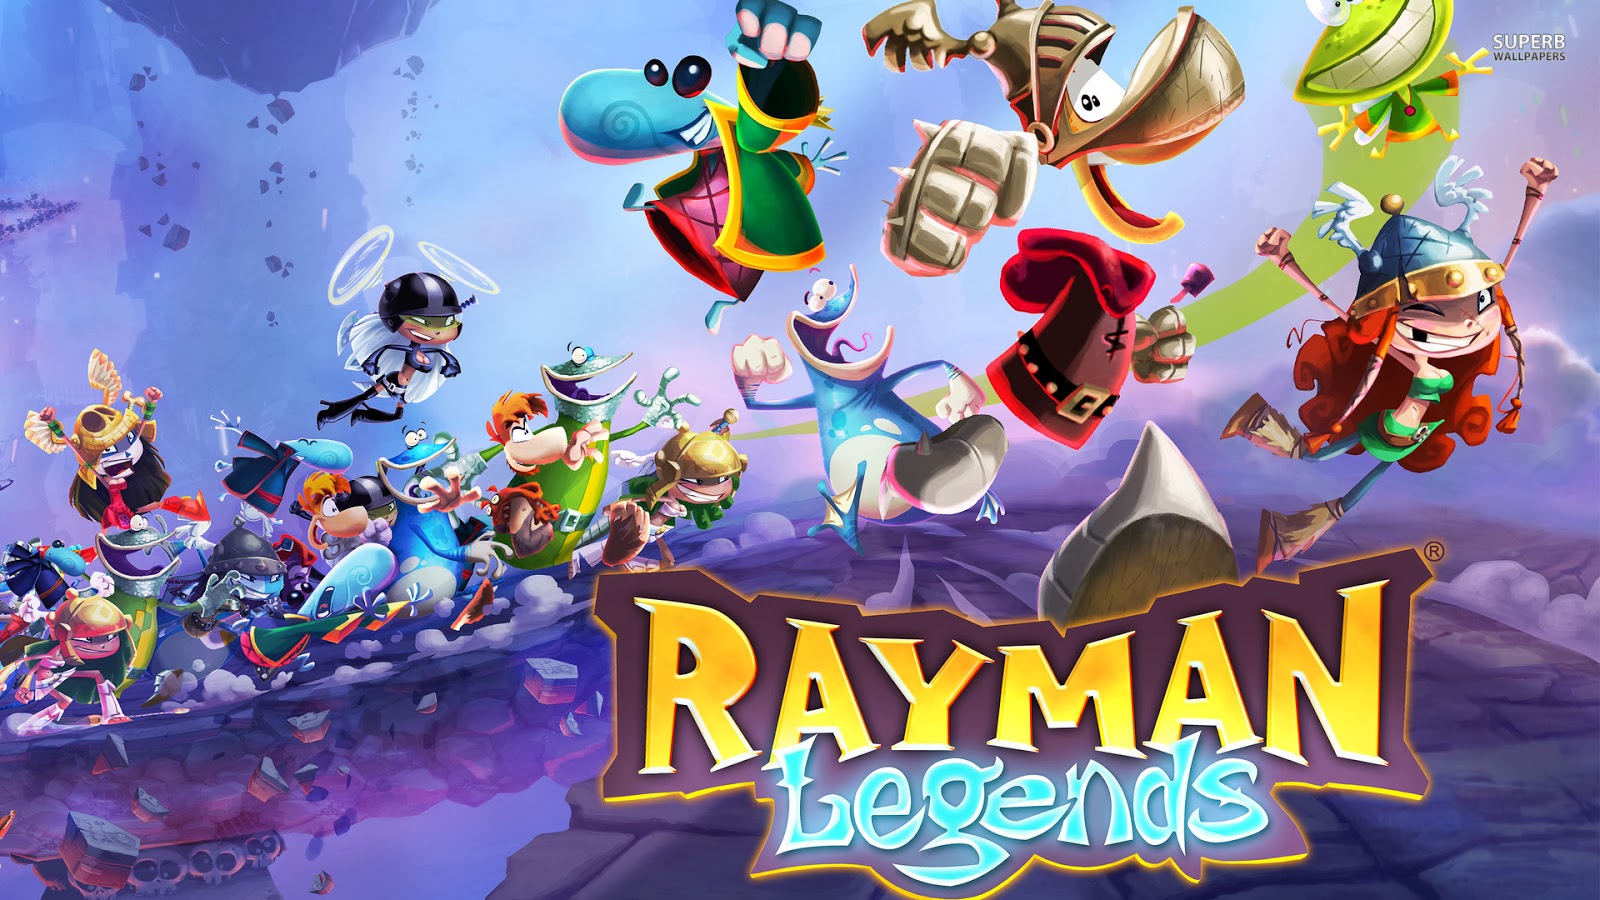 rayman legends switch review